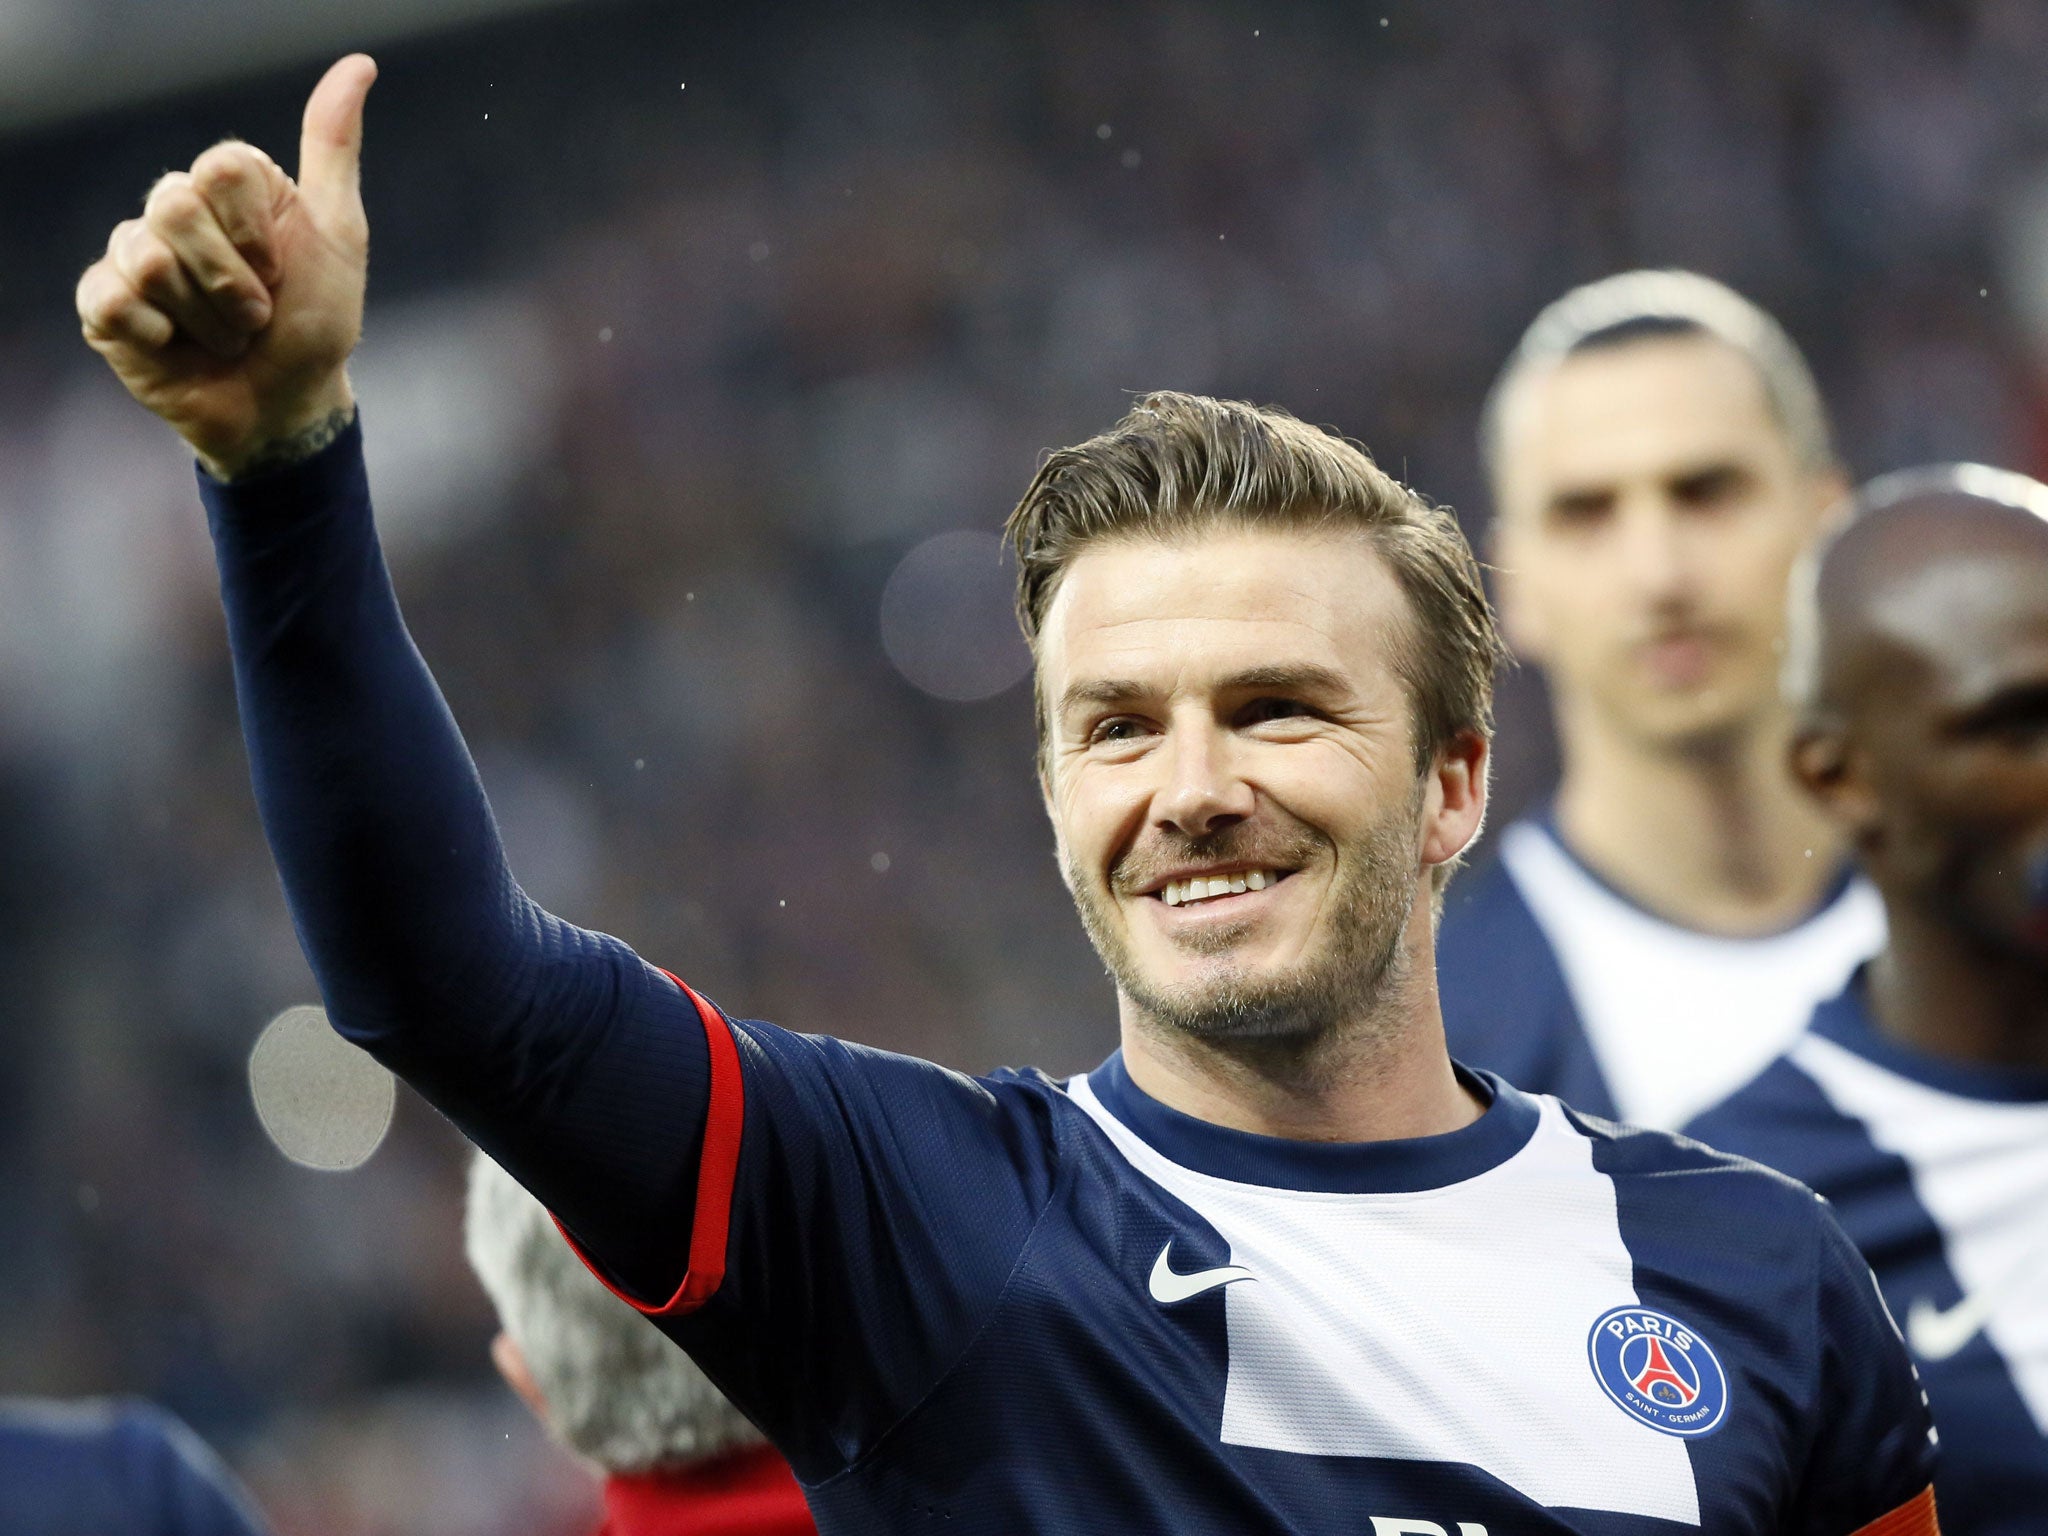 David Beckham gives the 'thumbs up' to fans